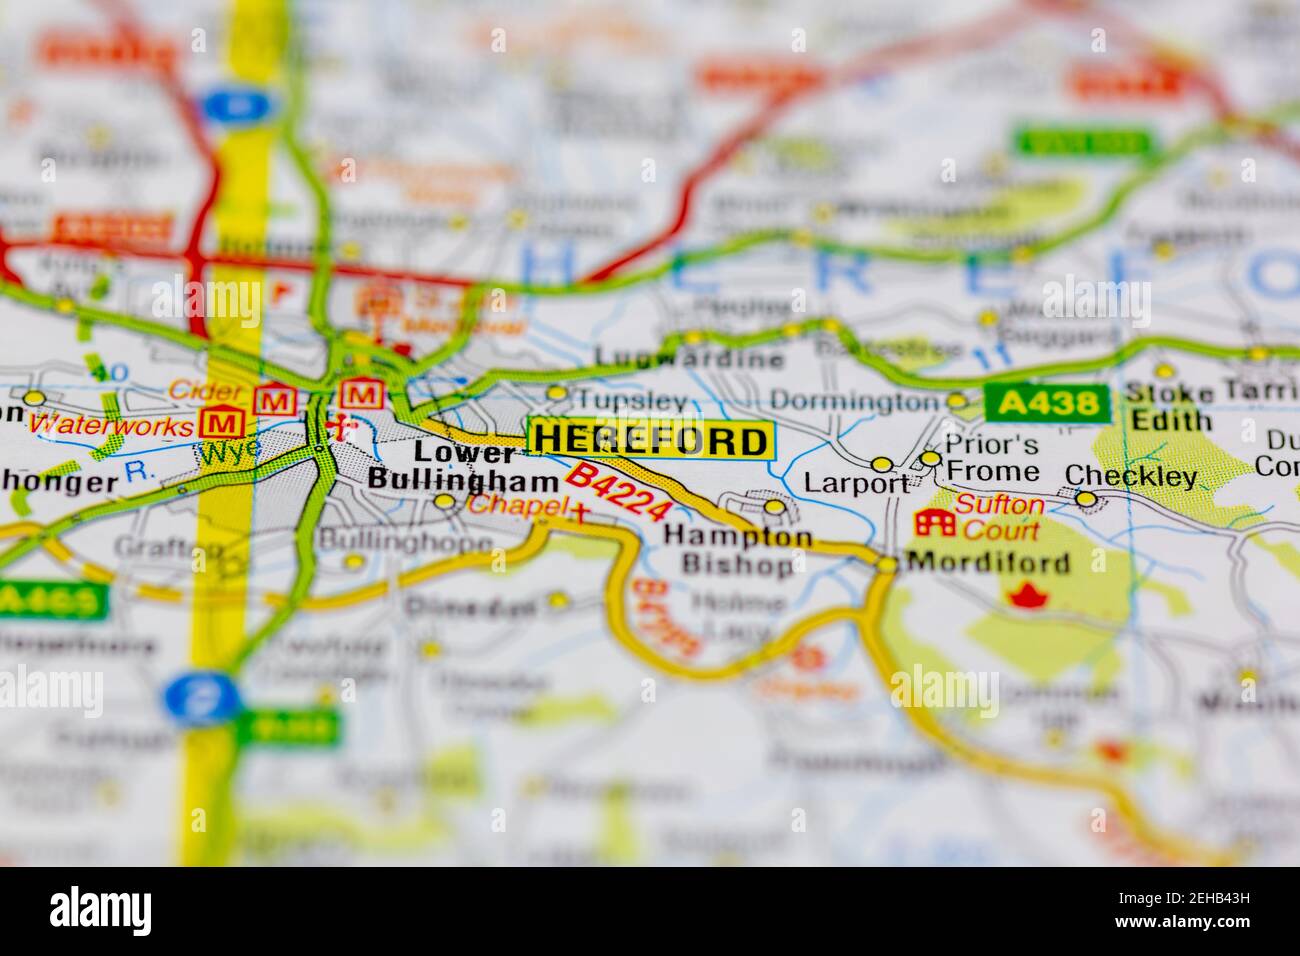 Hereford and surrounding areas shown on a road map or Geography map Stock Photo